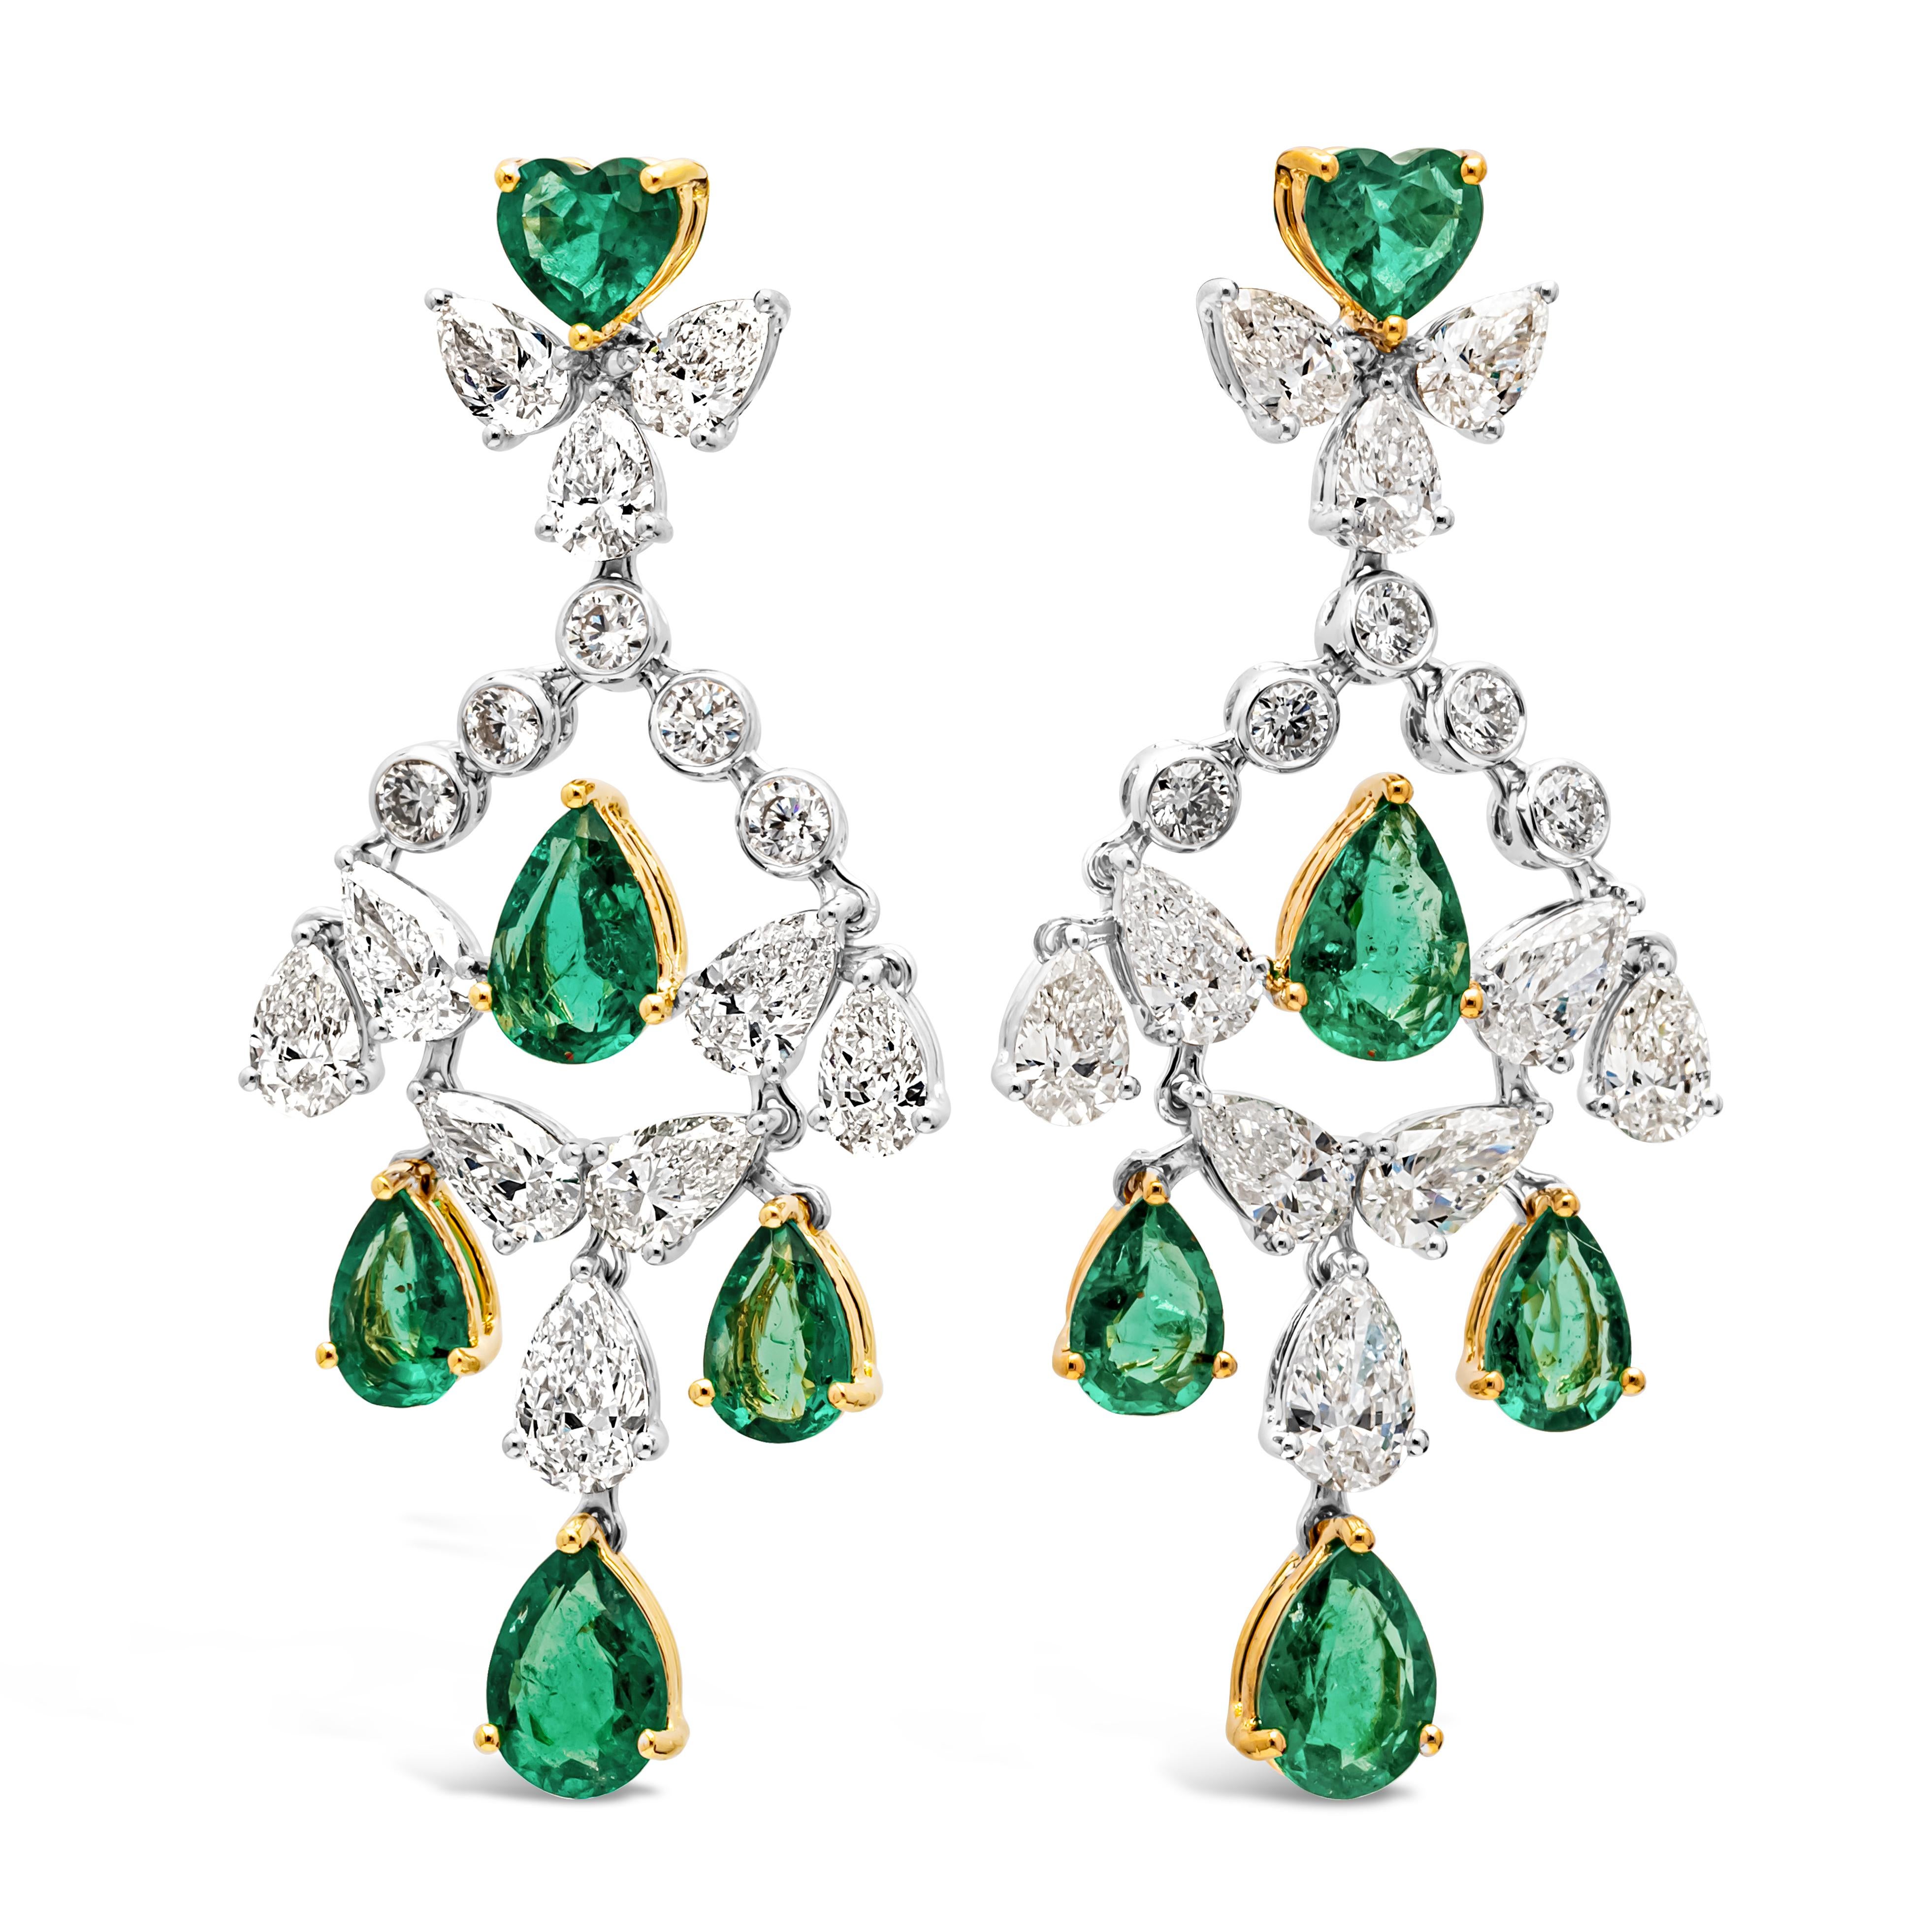 Contemporary Roman Malakov 8.56 Carats Total Mixed Cut Diamond & Emerald Chandelier Earrings For Sale